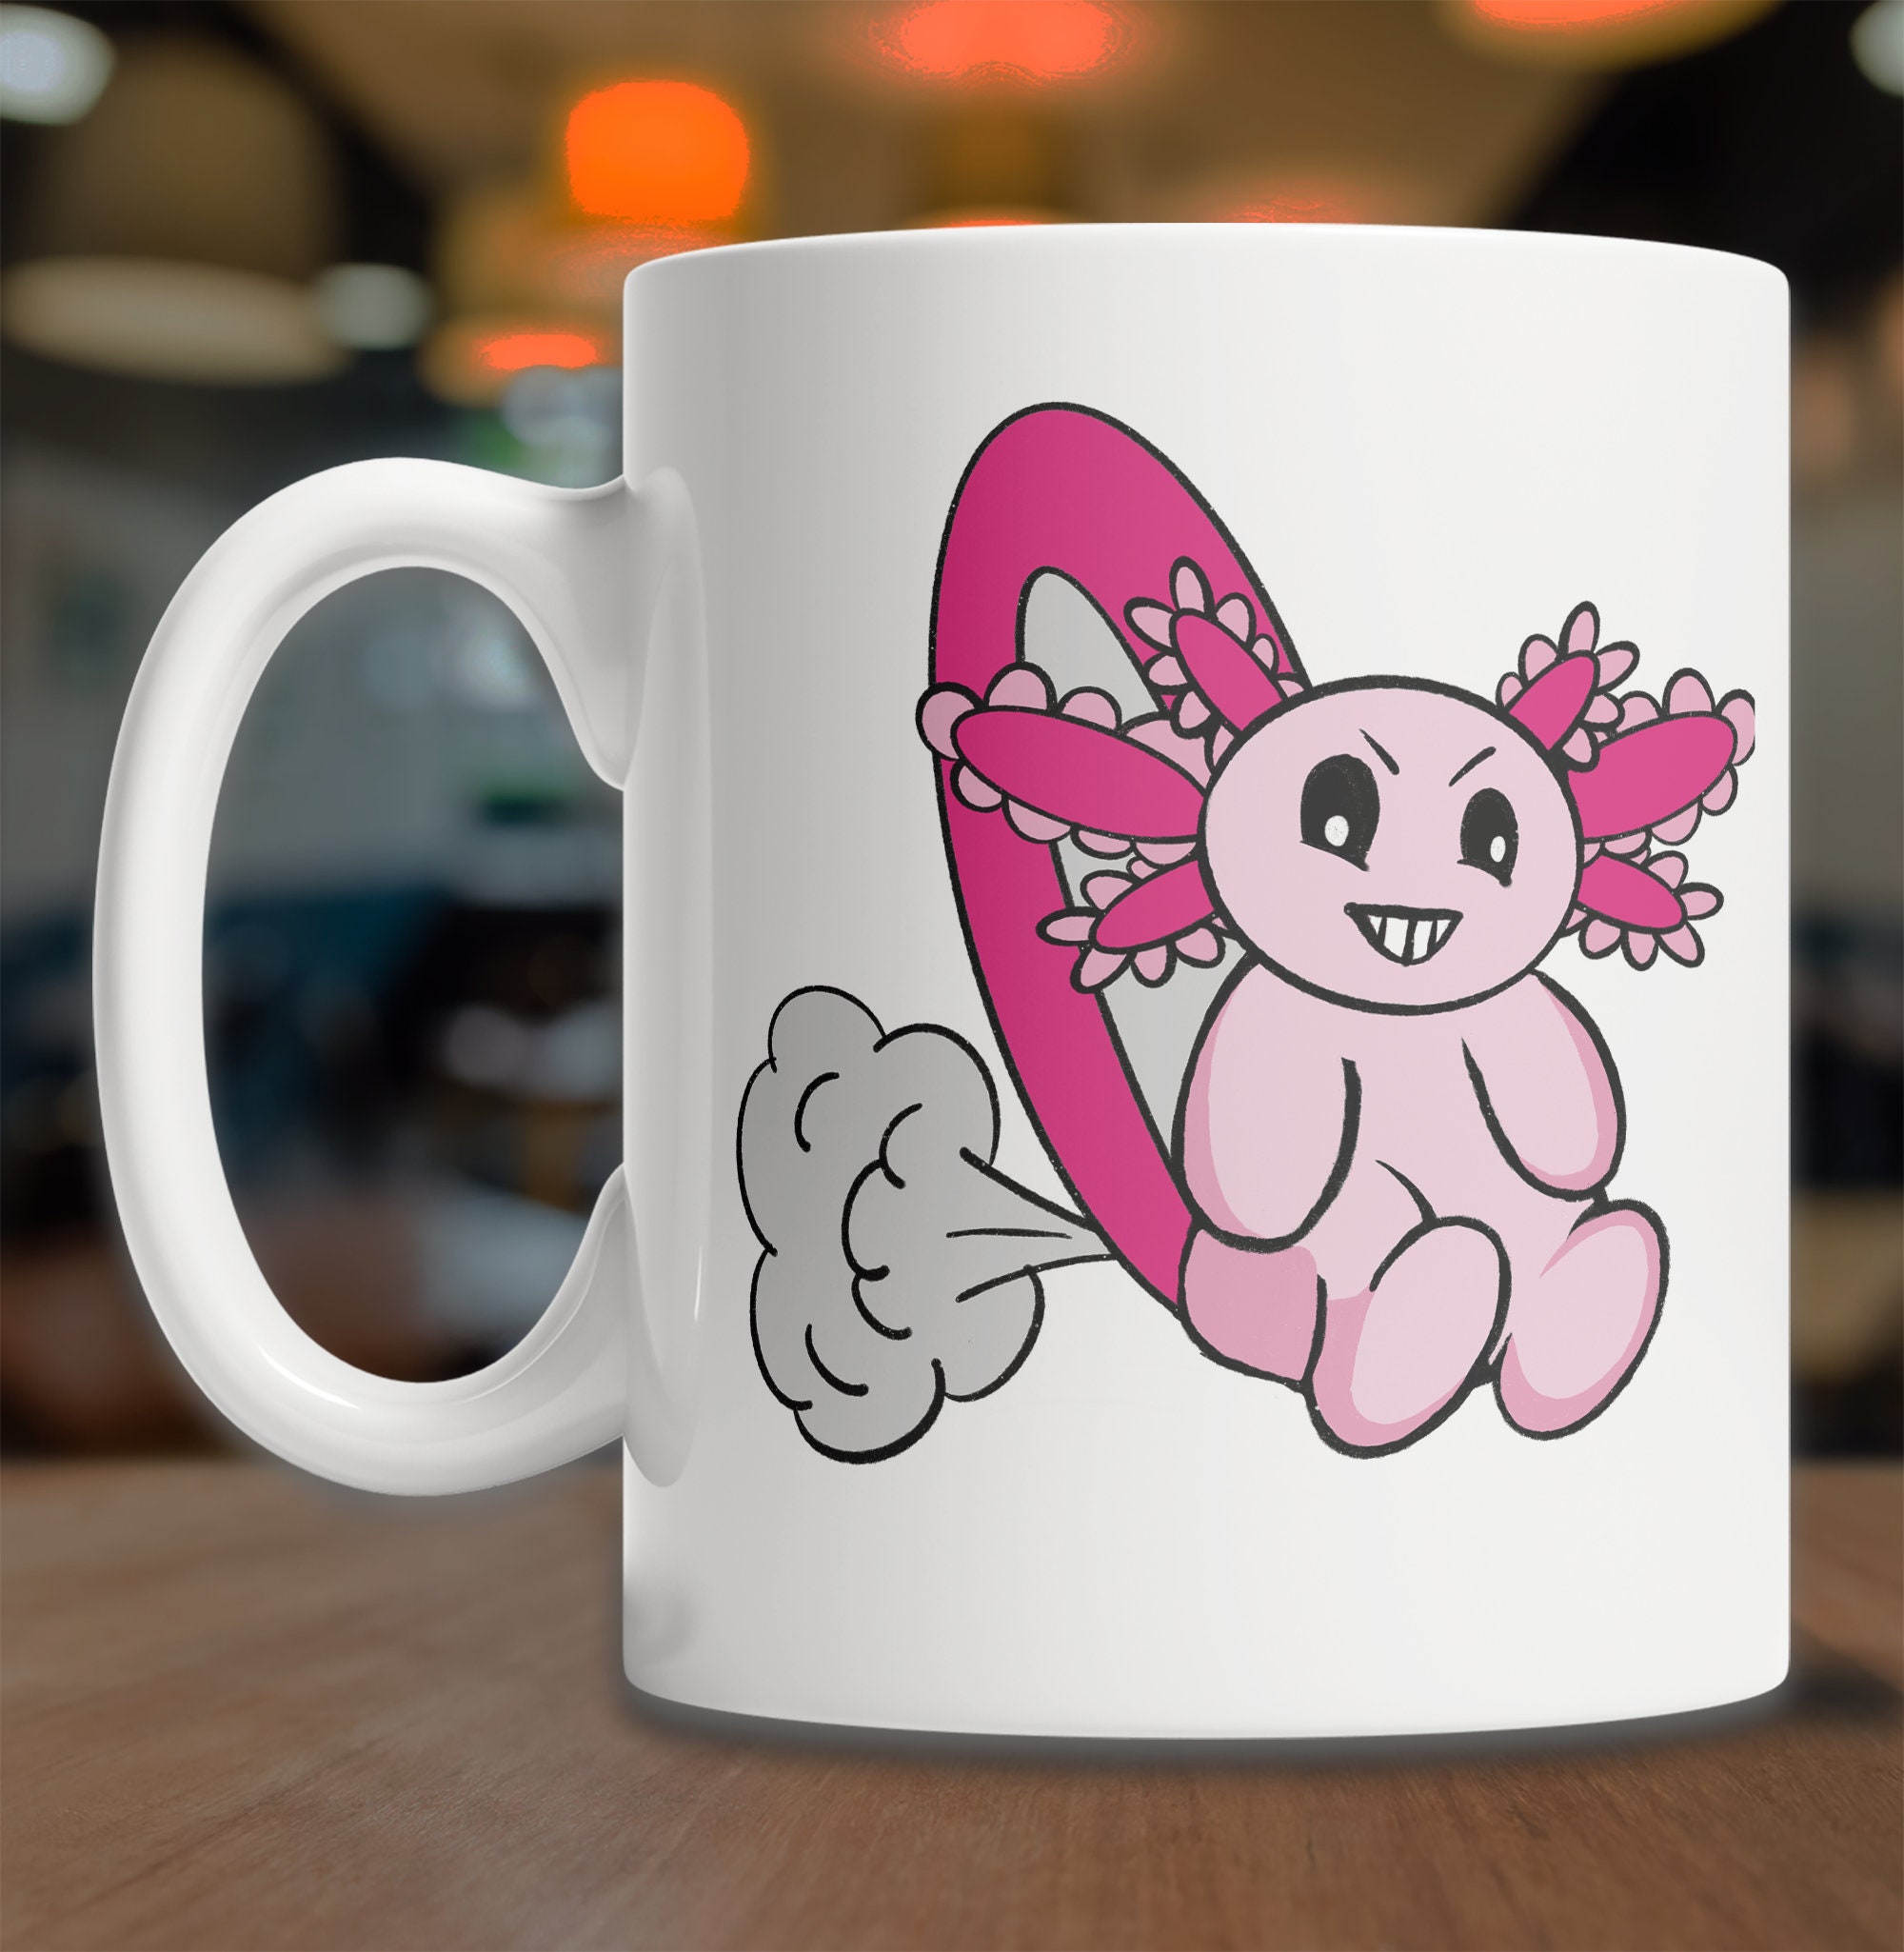  Personalized Axolotl Coffee Mug Cup Gift With Choose